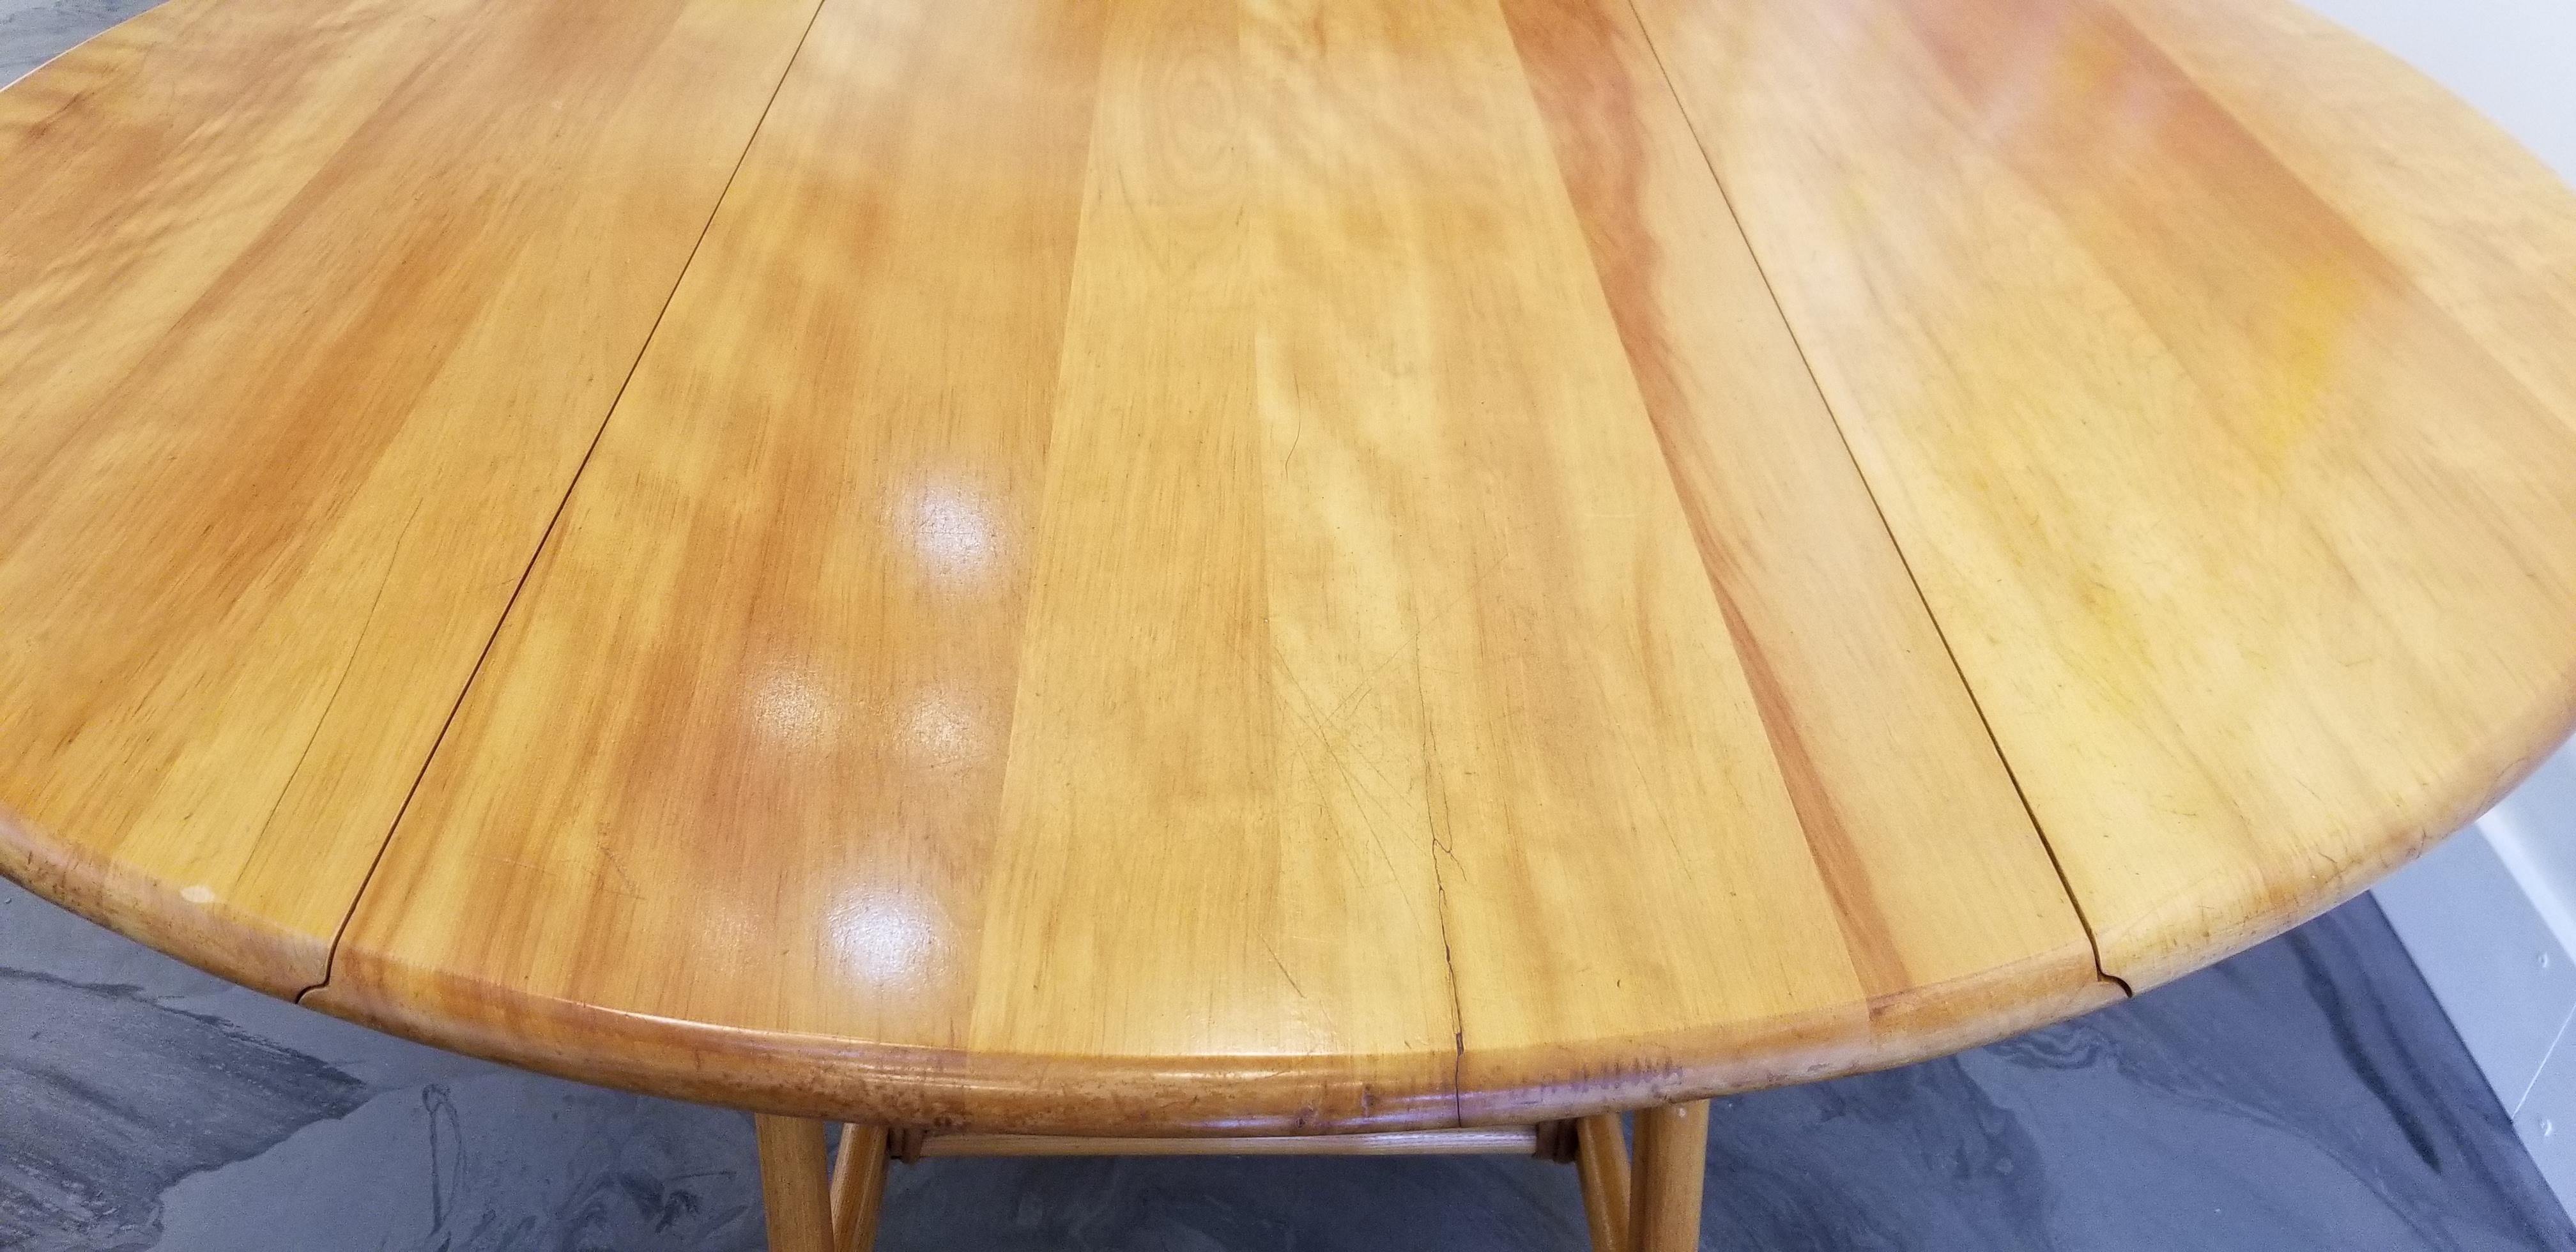 Rattan, Maple and Ash Gateleg Dining Table by Heywood Wakefield 1